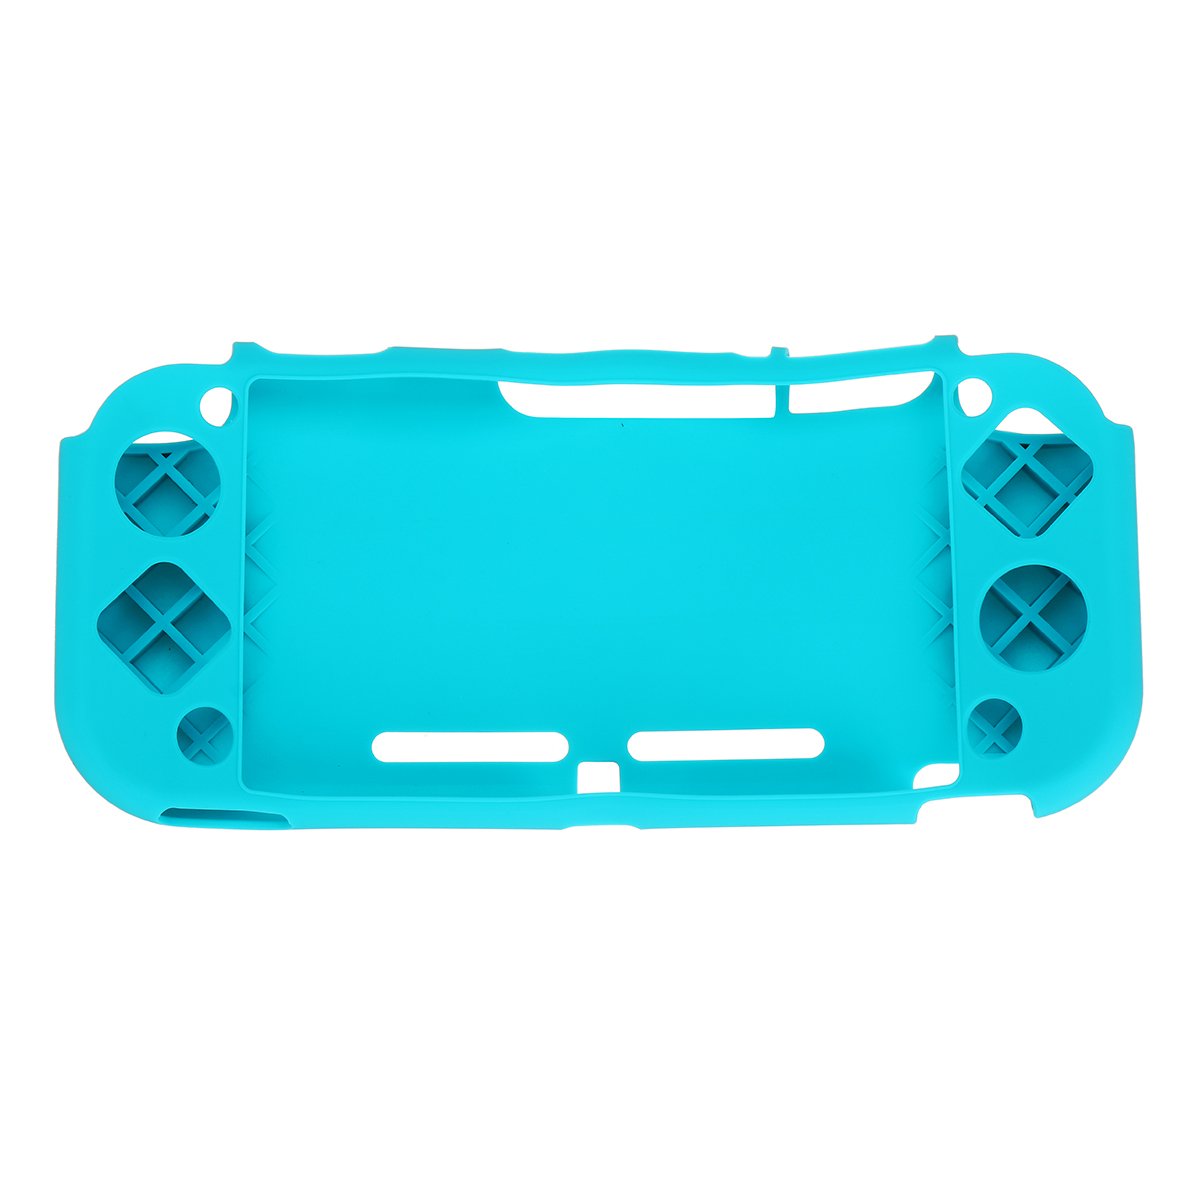 Protective Soft Silicone Case Cover Shell for Nintendo Switch Lite Game Console 2